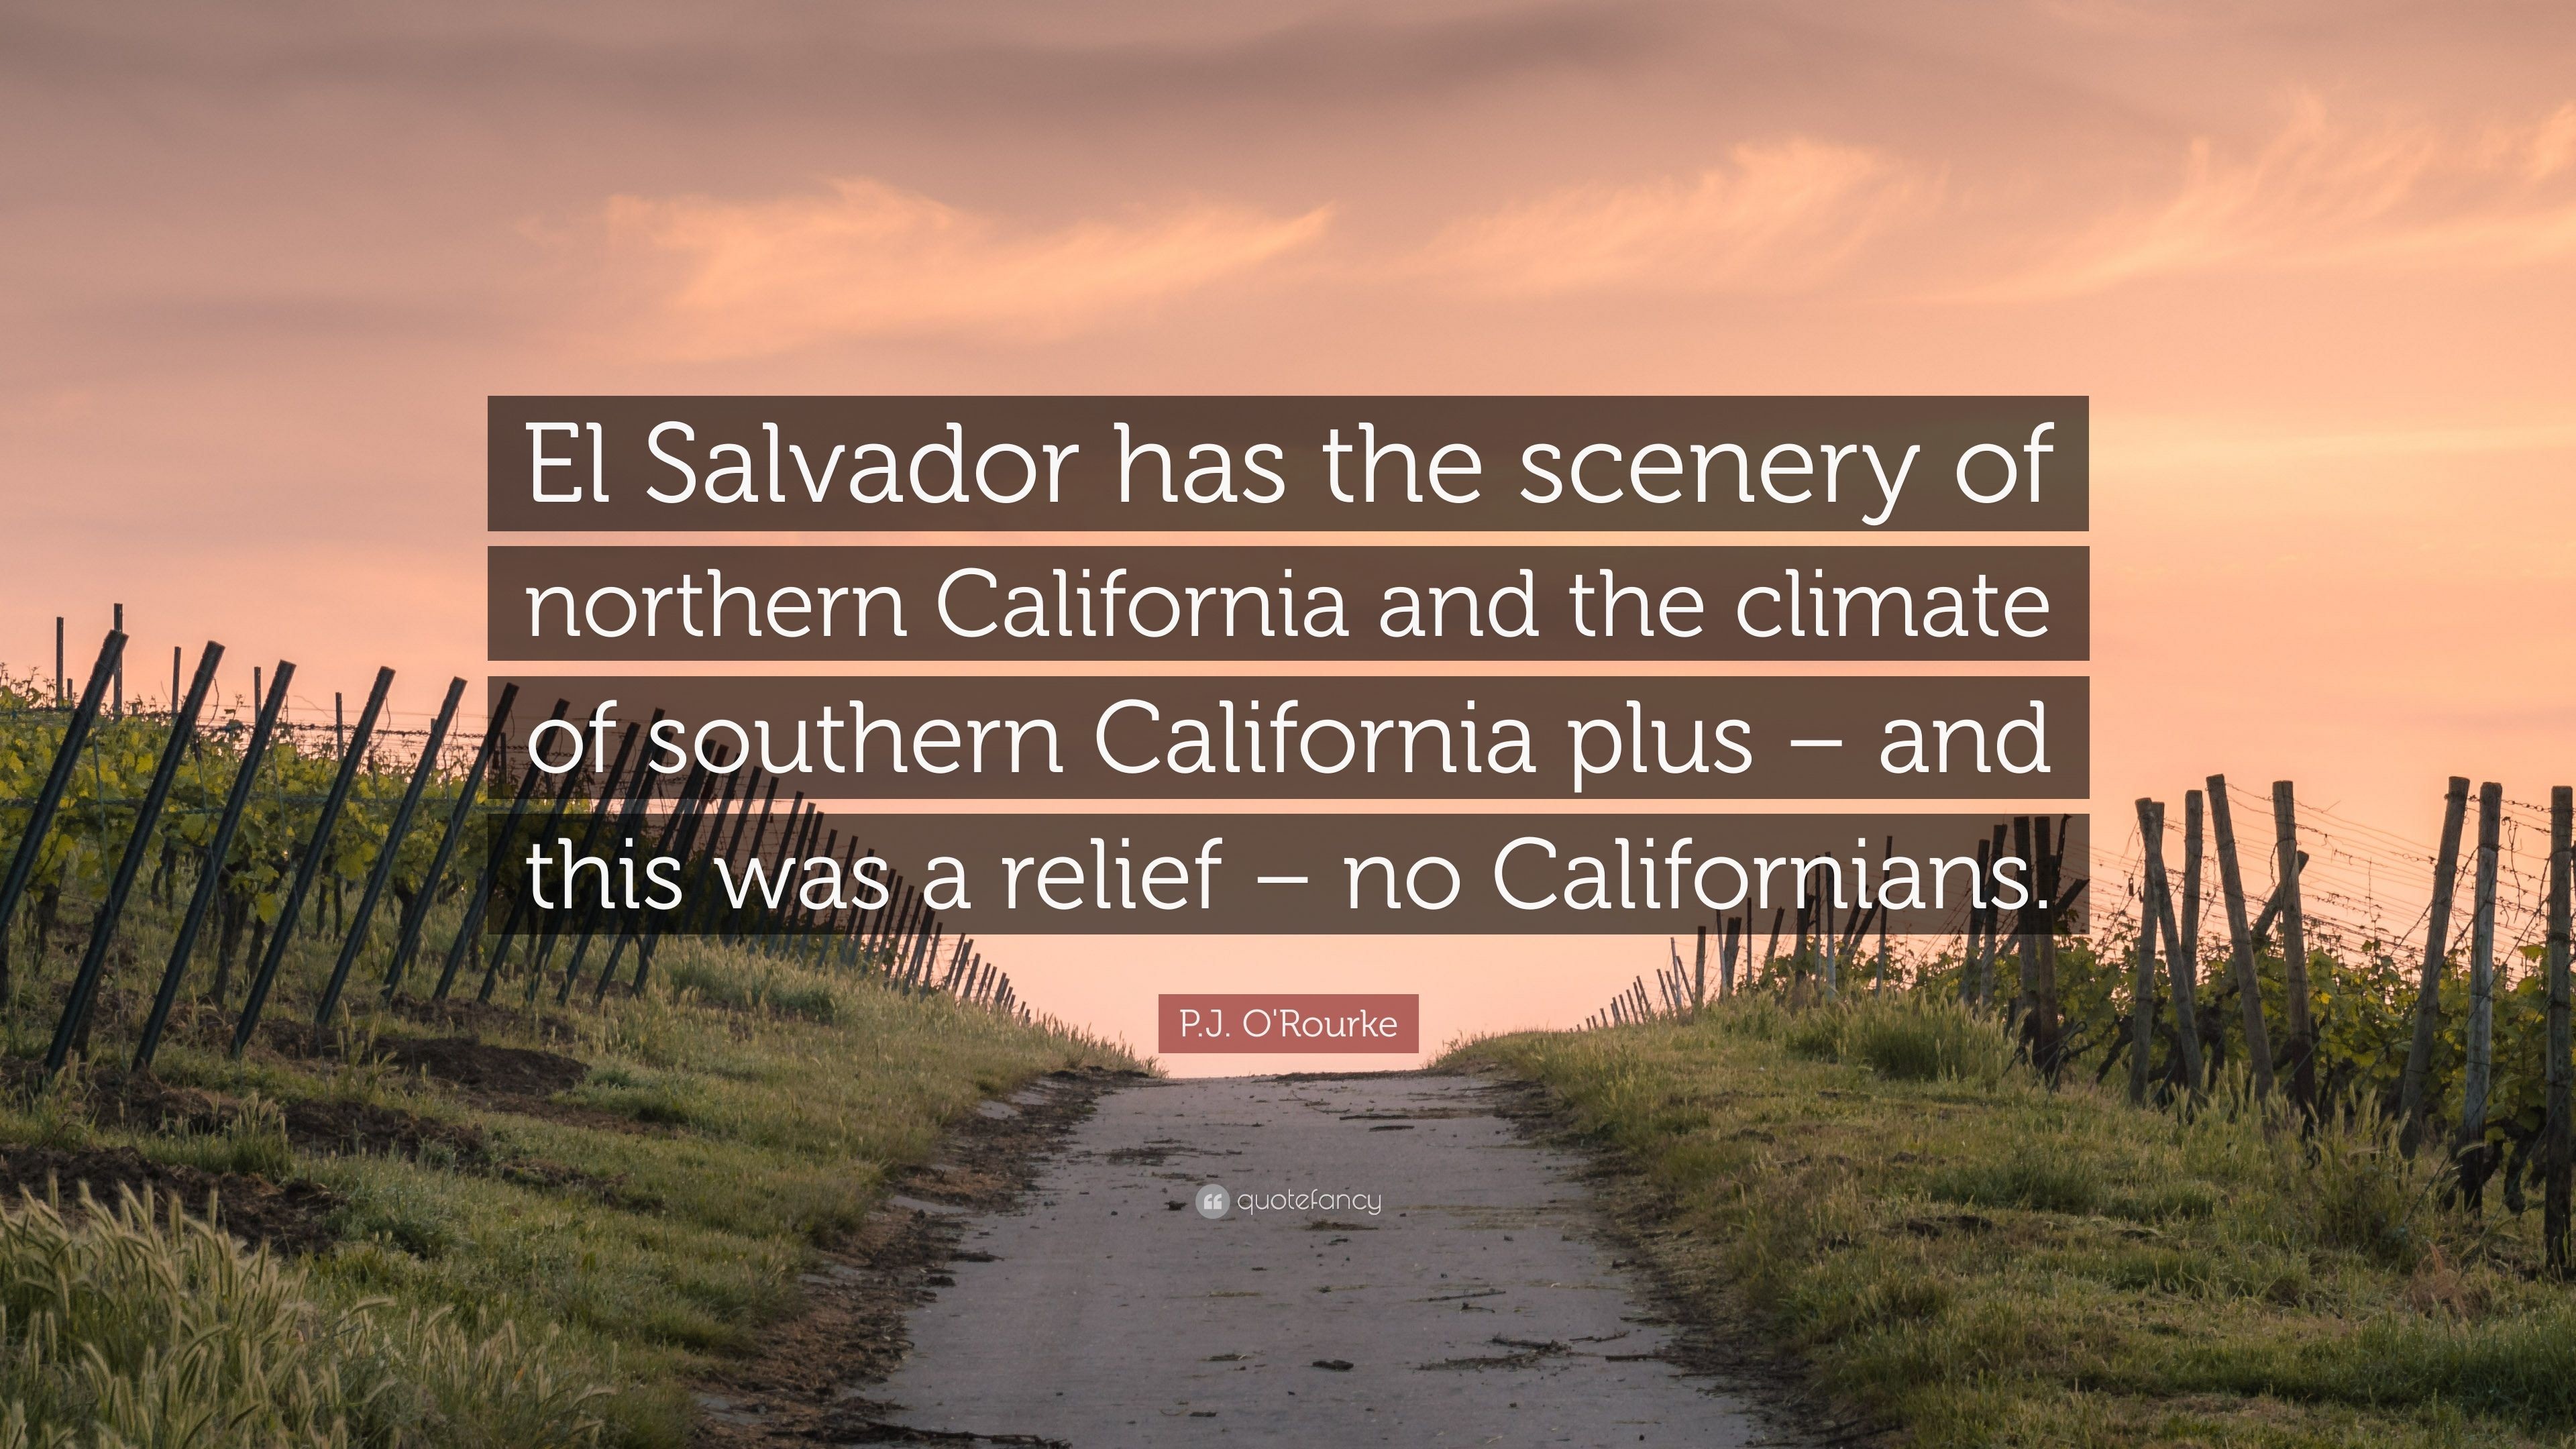 3840x2160 P.J. O'Rourke Quote: “El Salvador has the scenery of northern California and